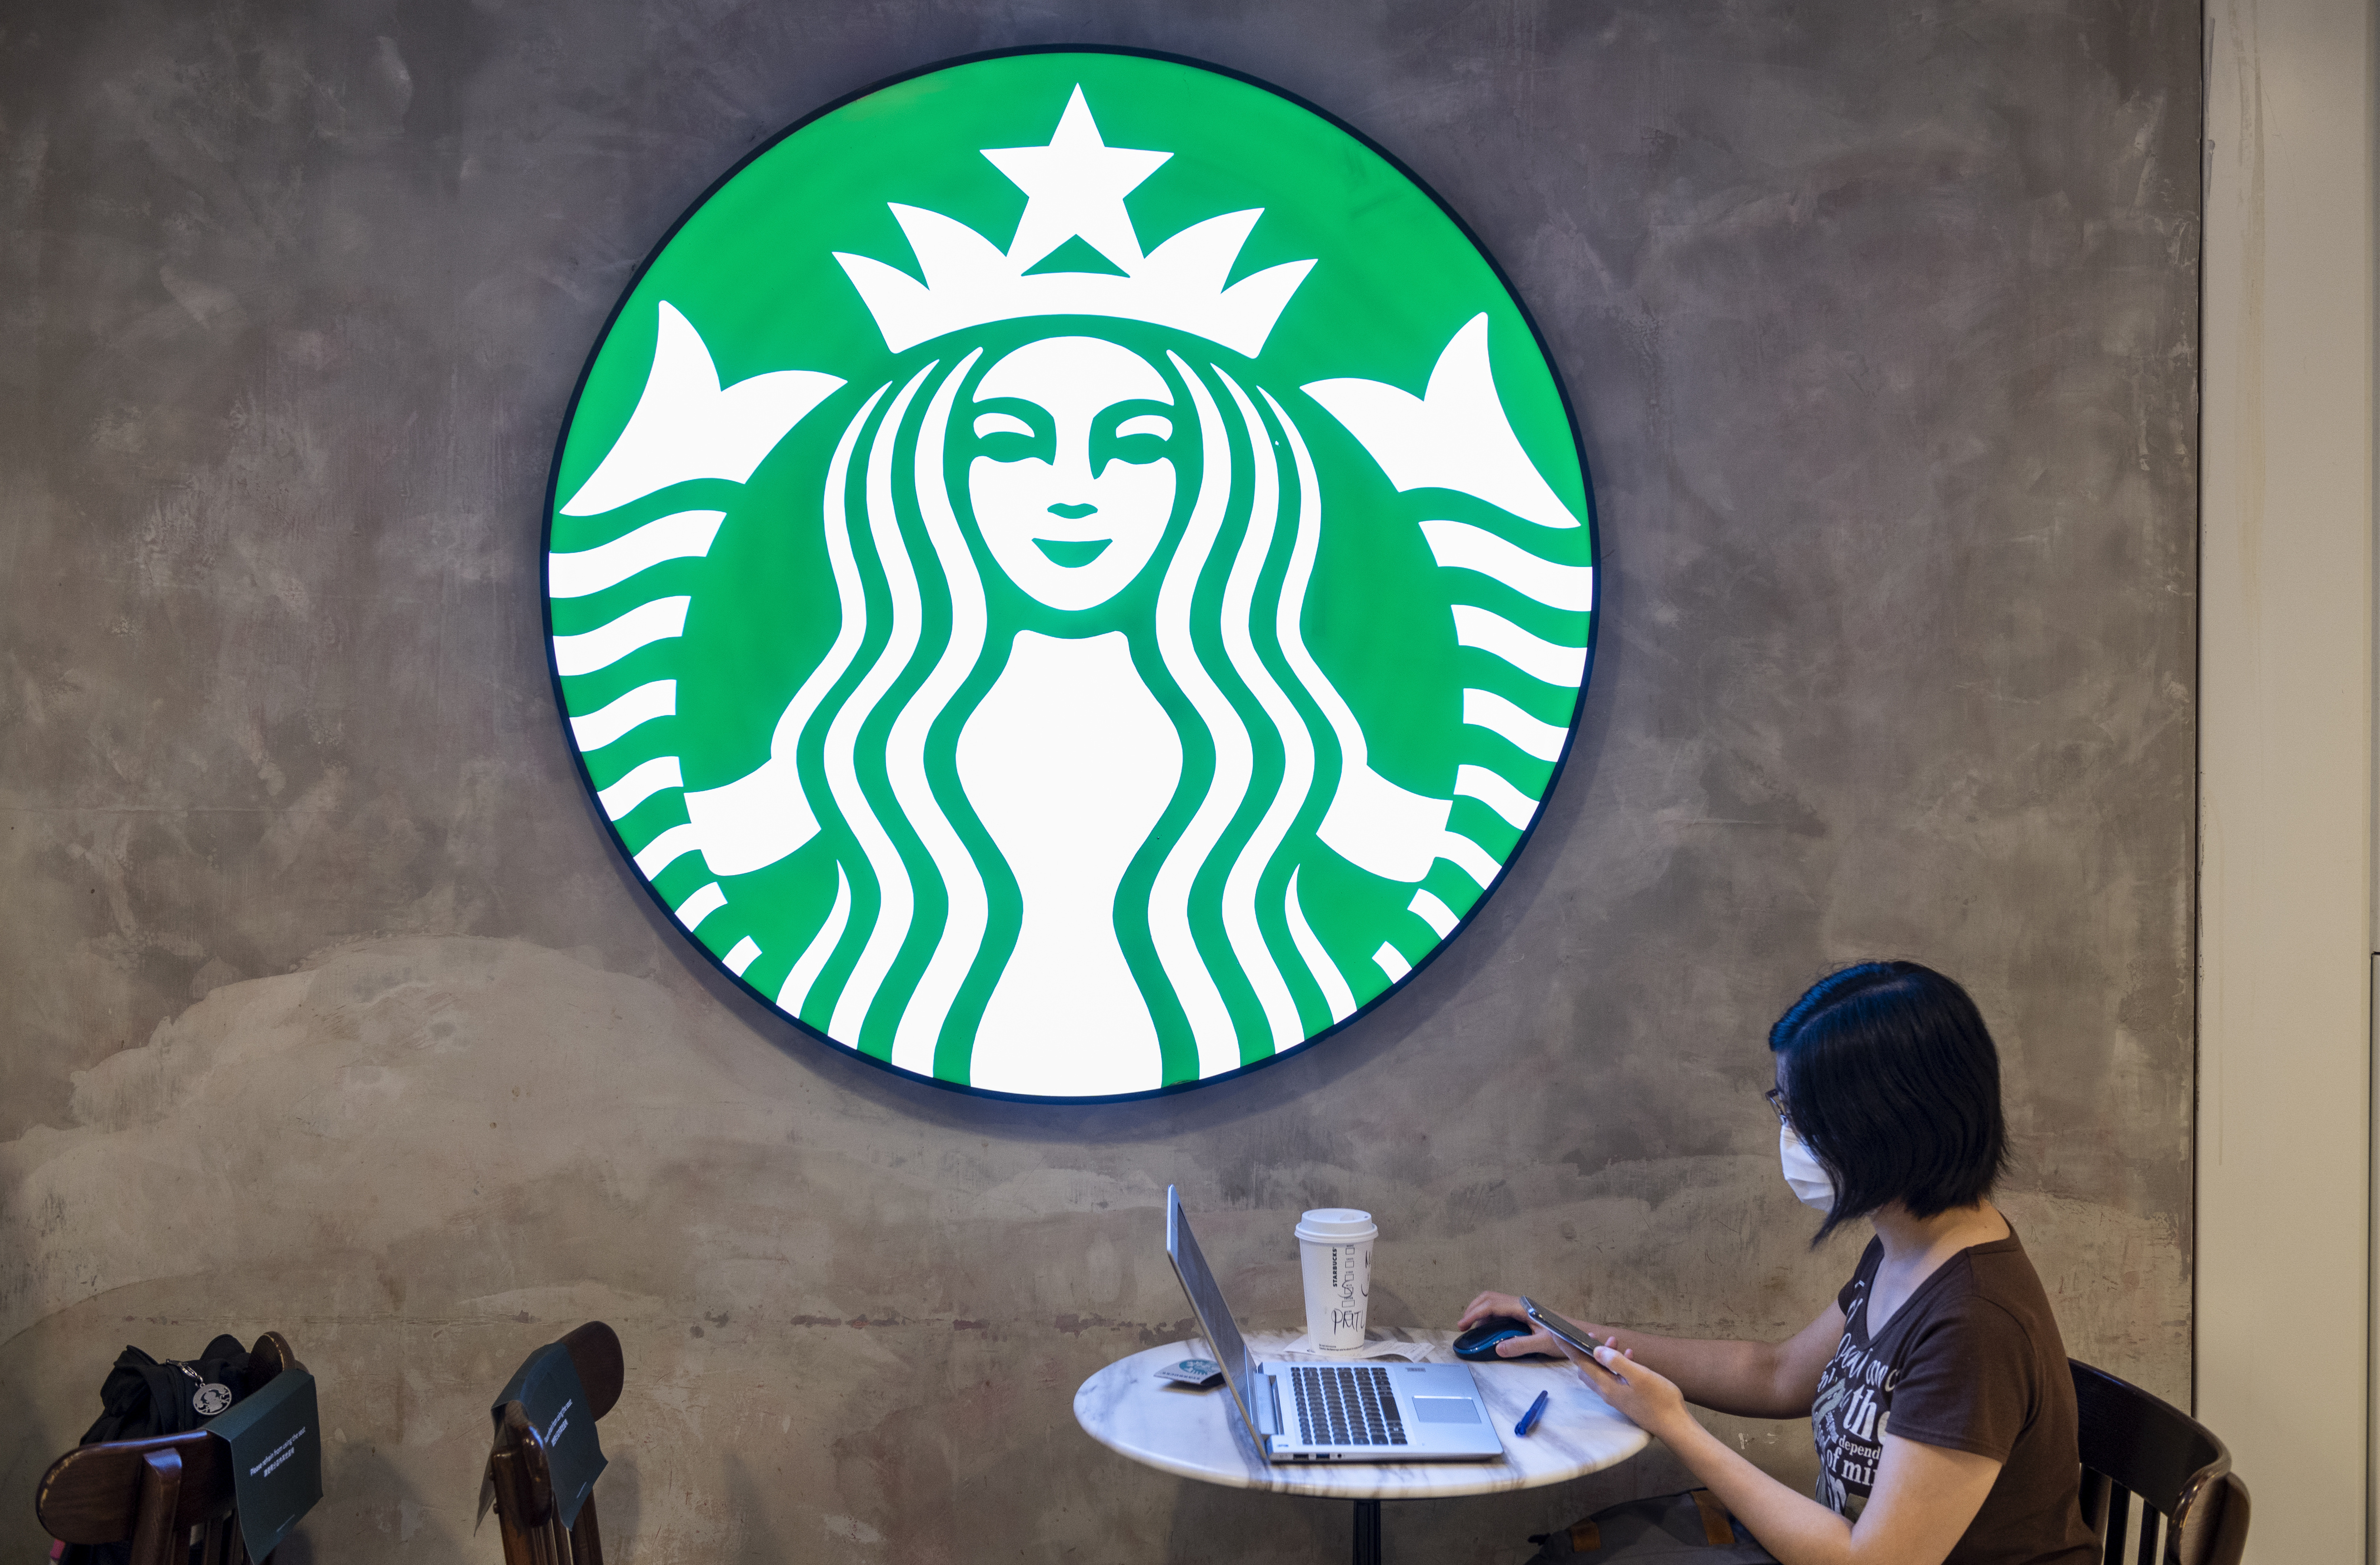 A masked woman with short dark hair sits at a marble cafe table, working on her laptop under an illuminated Starbucks logo.